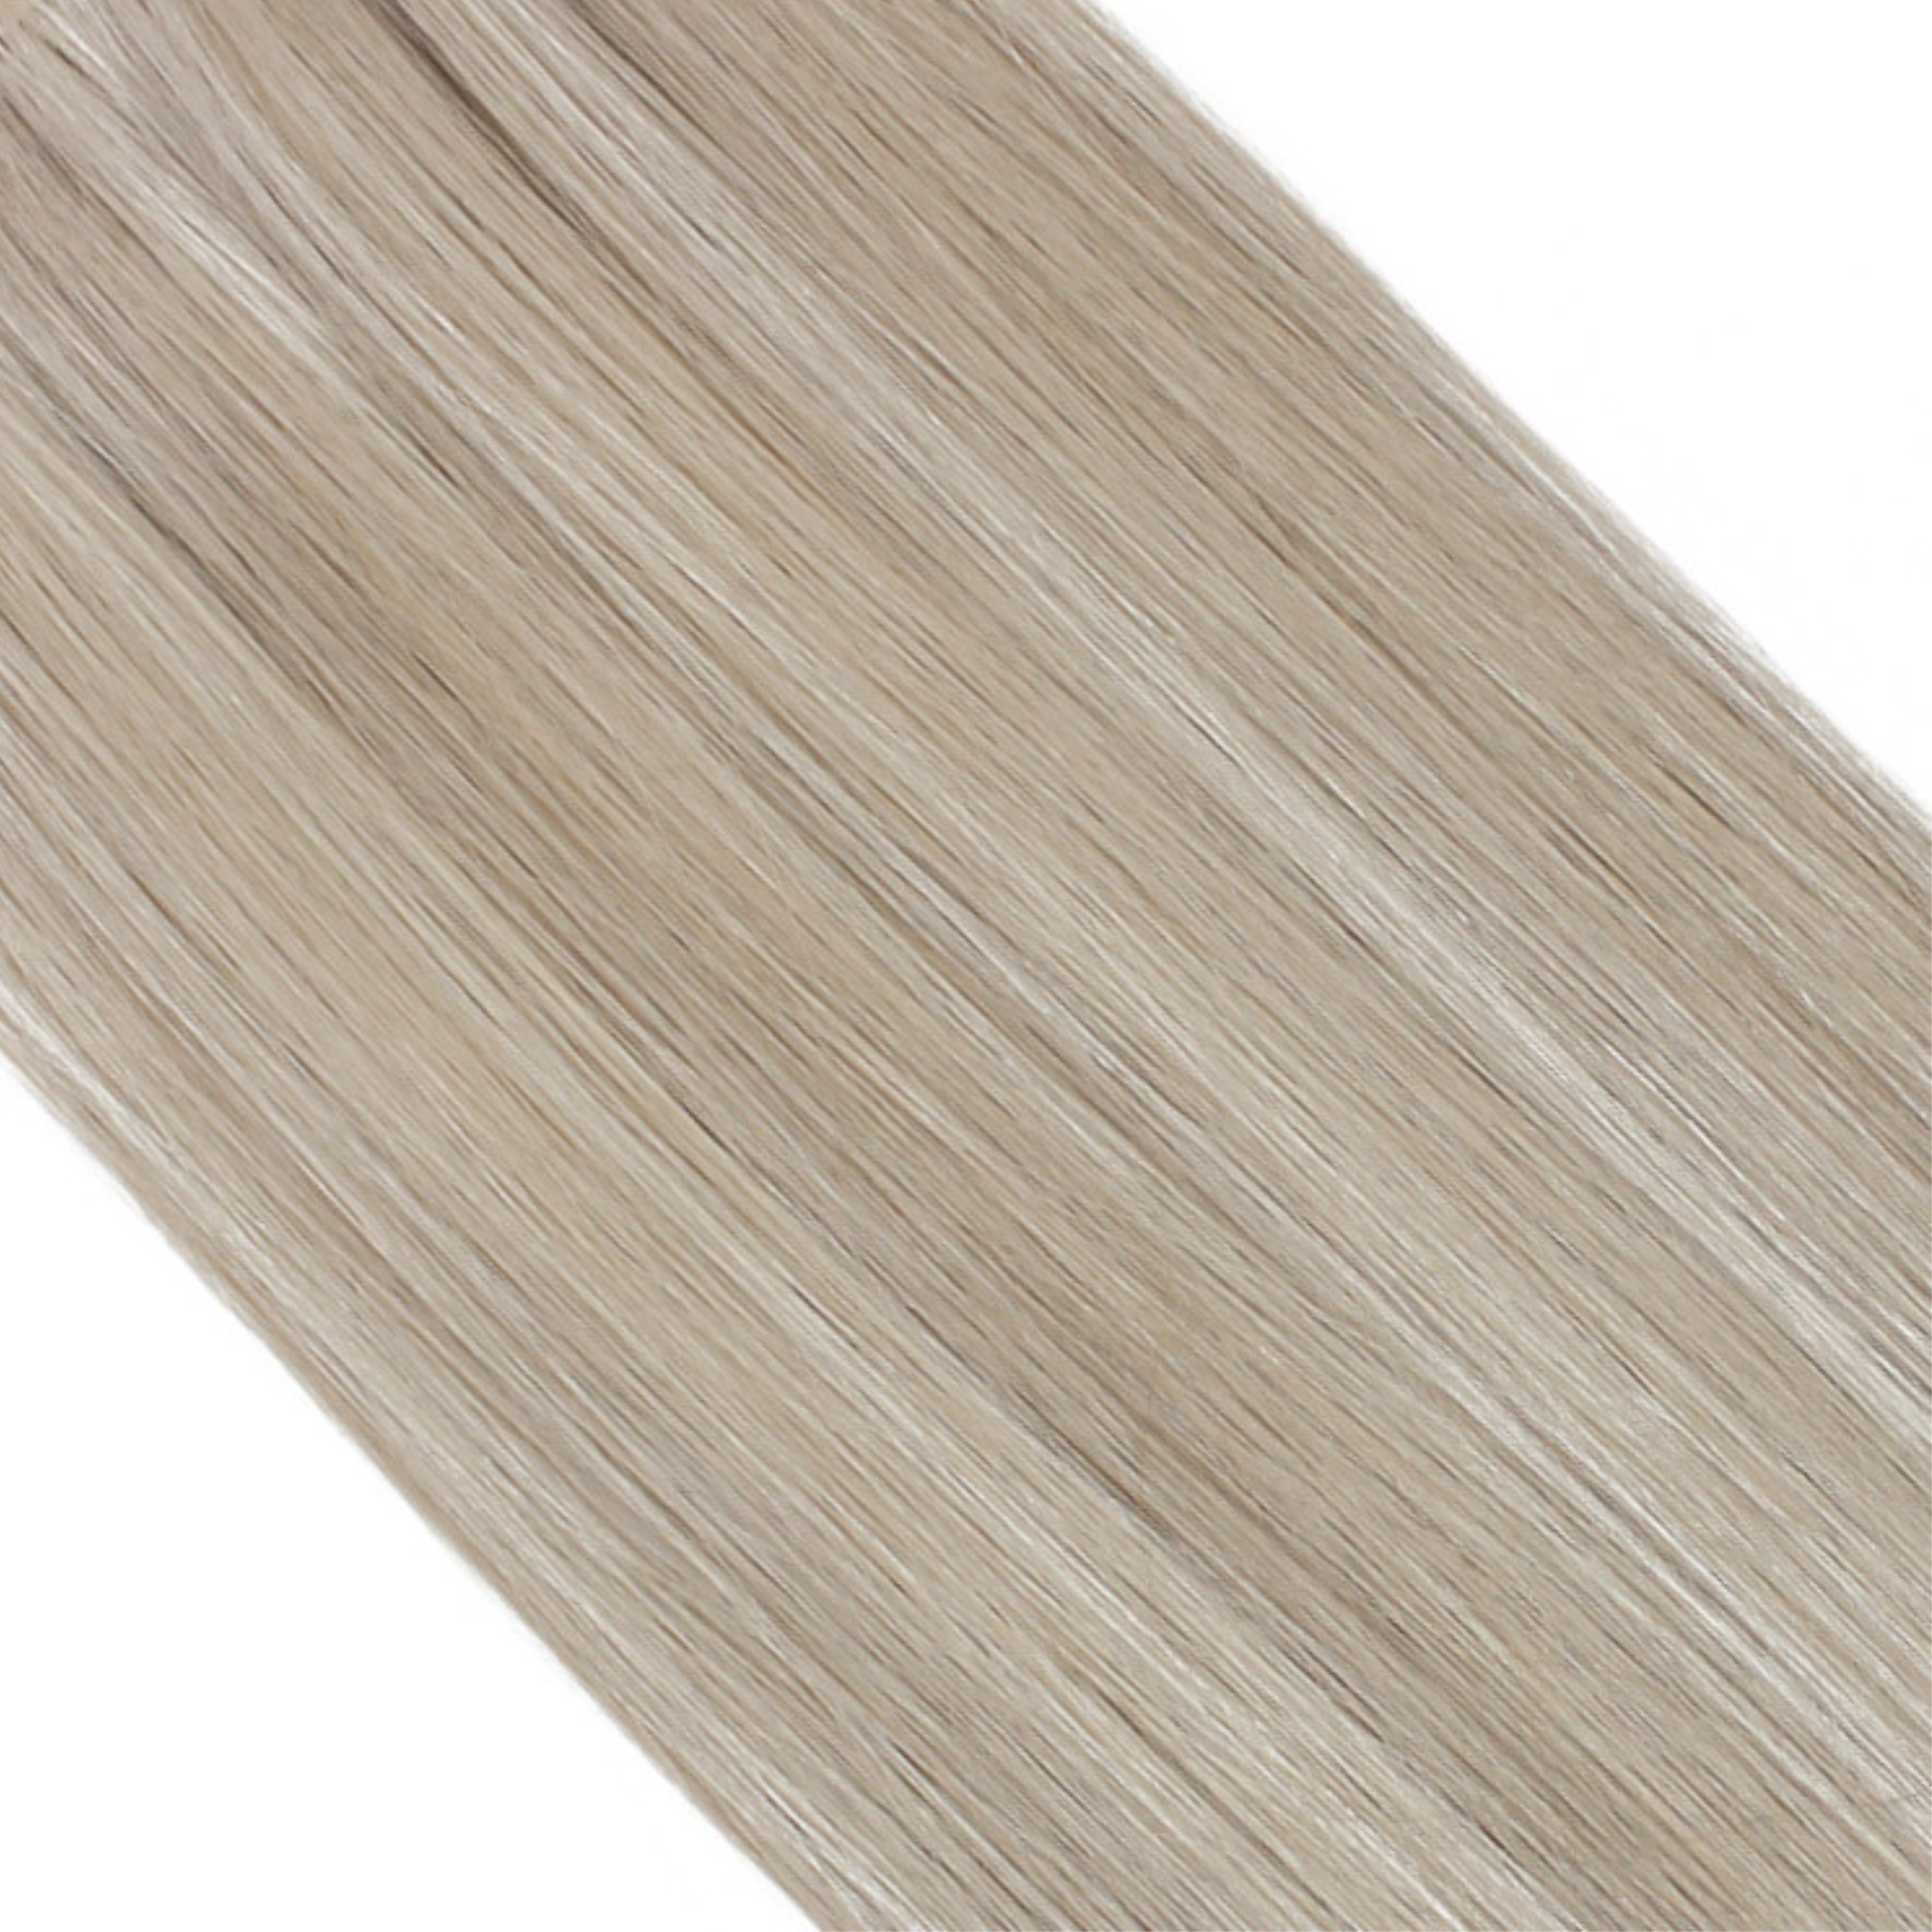 "hair rehab london 14" tape hair extensions shade swatch titled steel blonde"